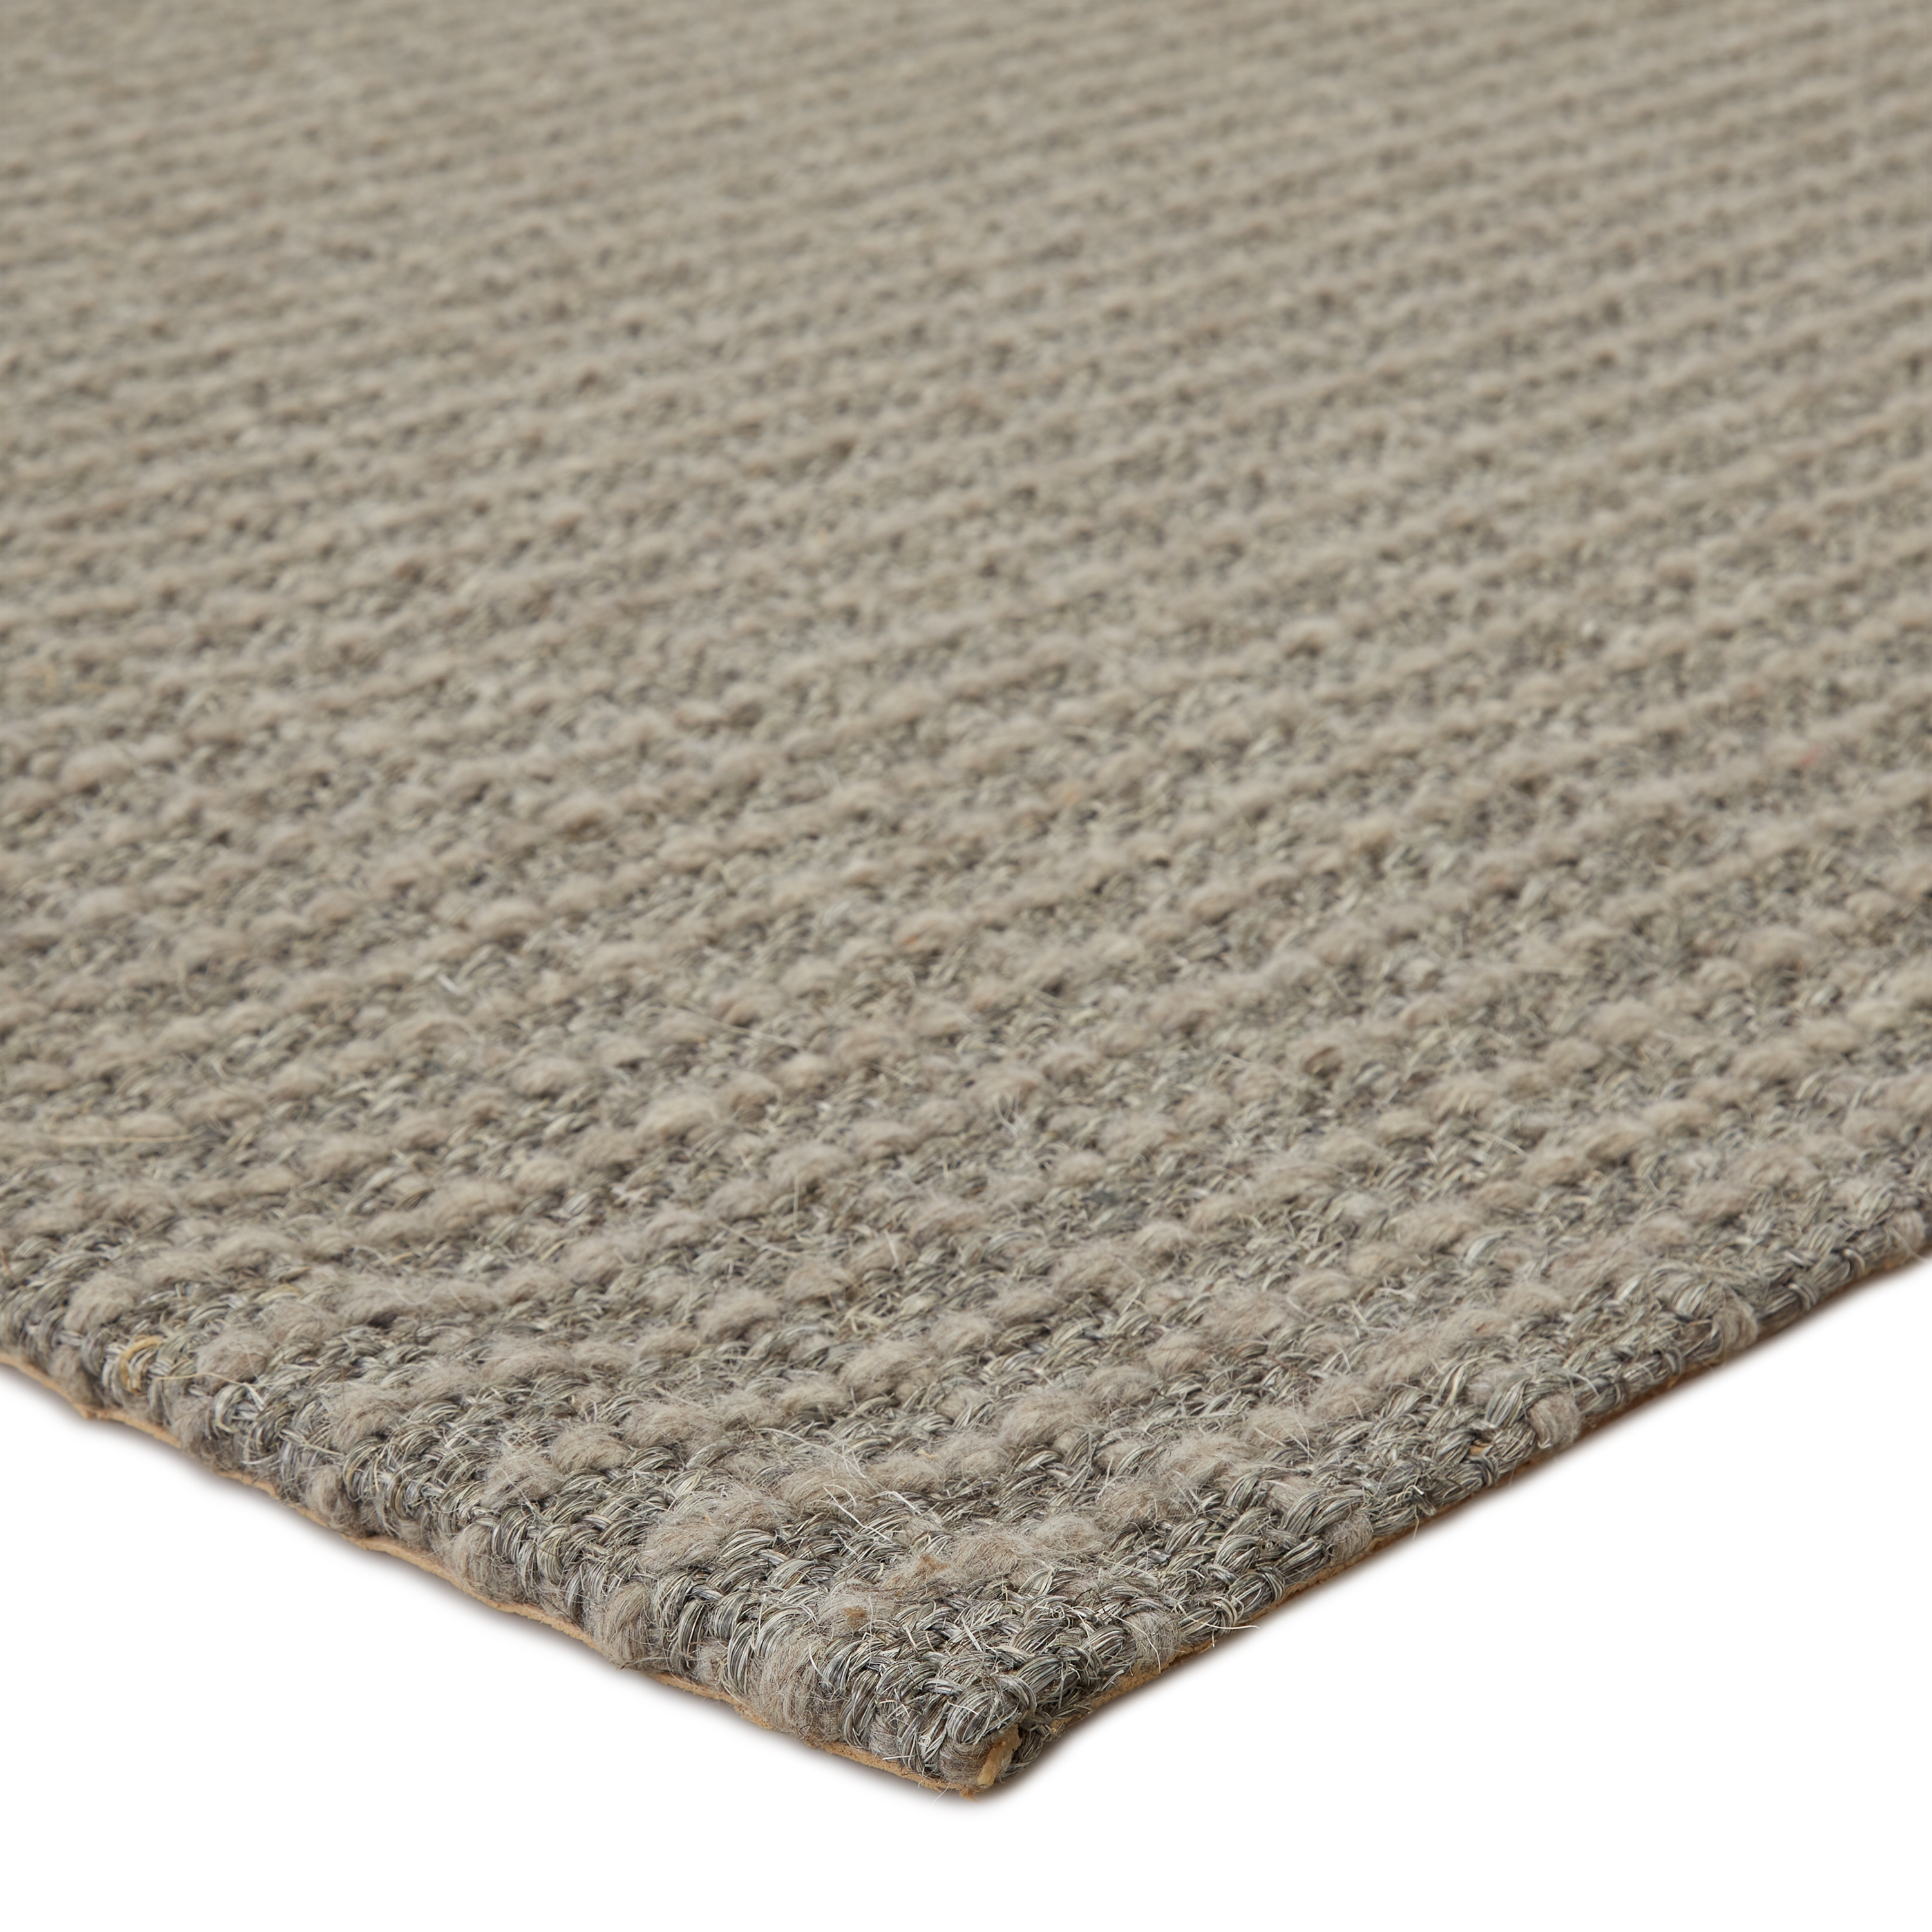 Tane Natural Solid Gray Area Rug (10'X14') - Image 1